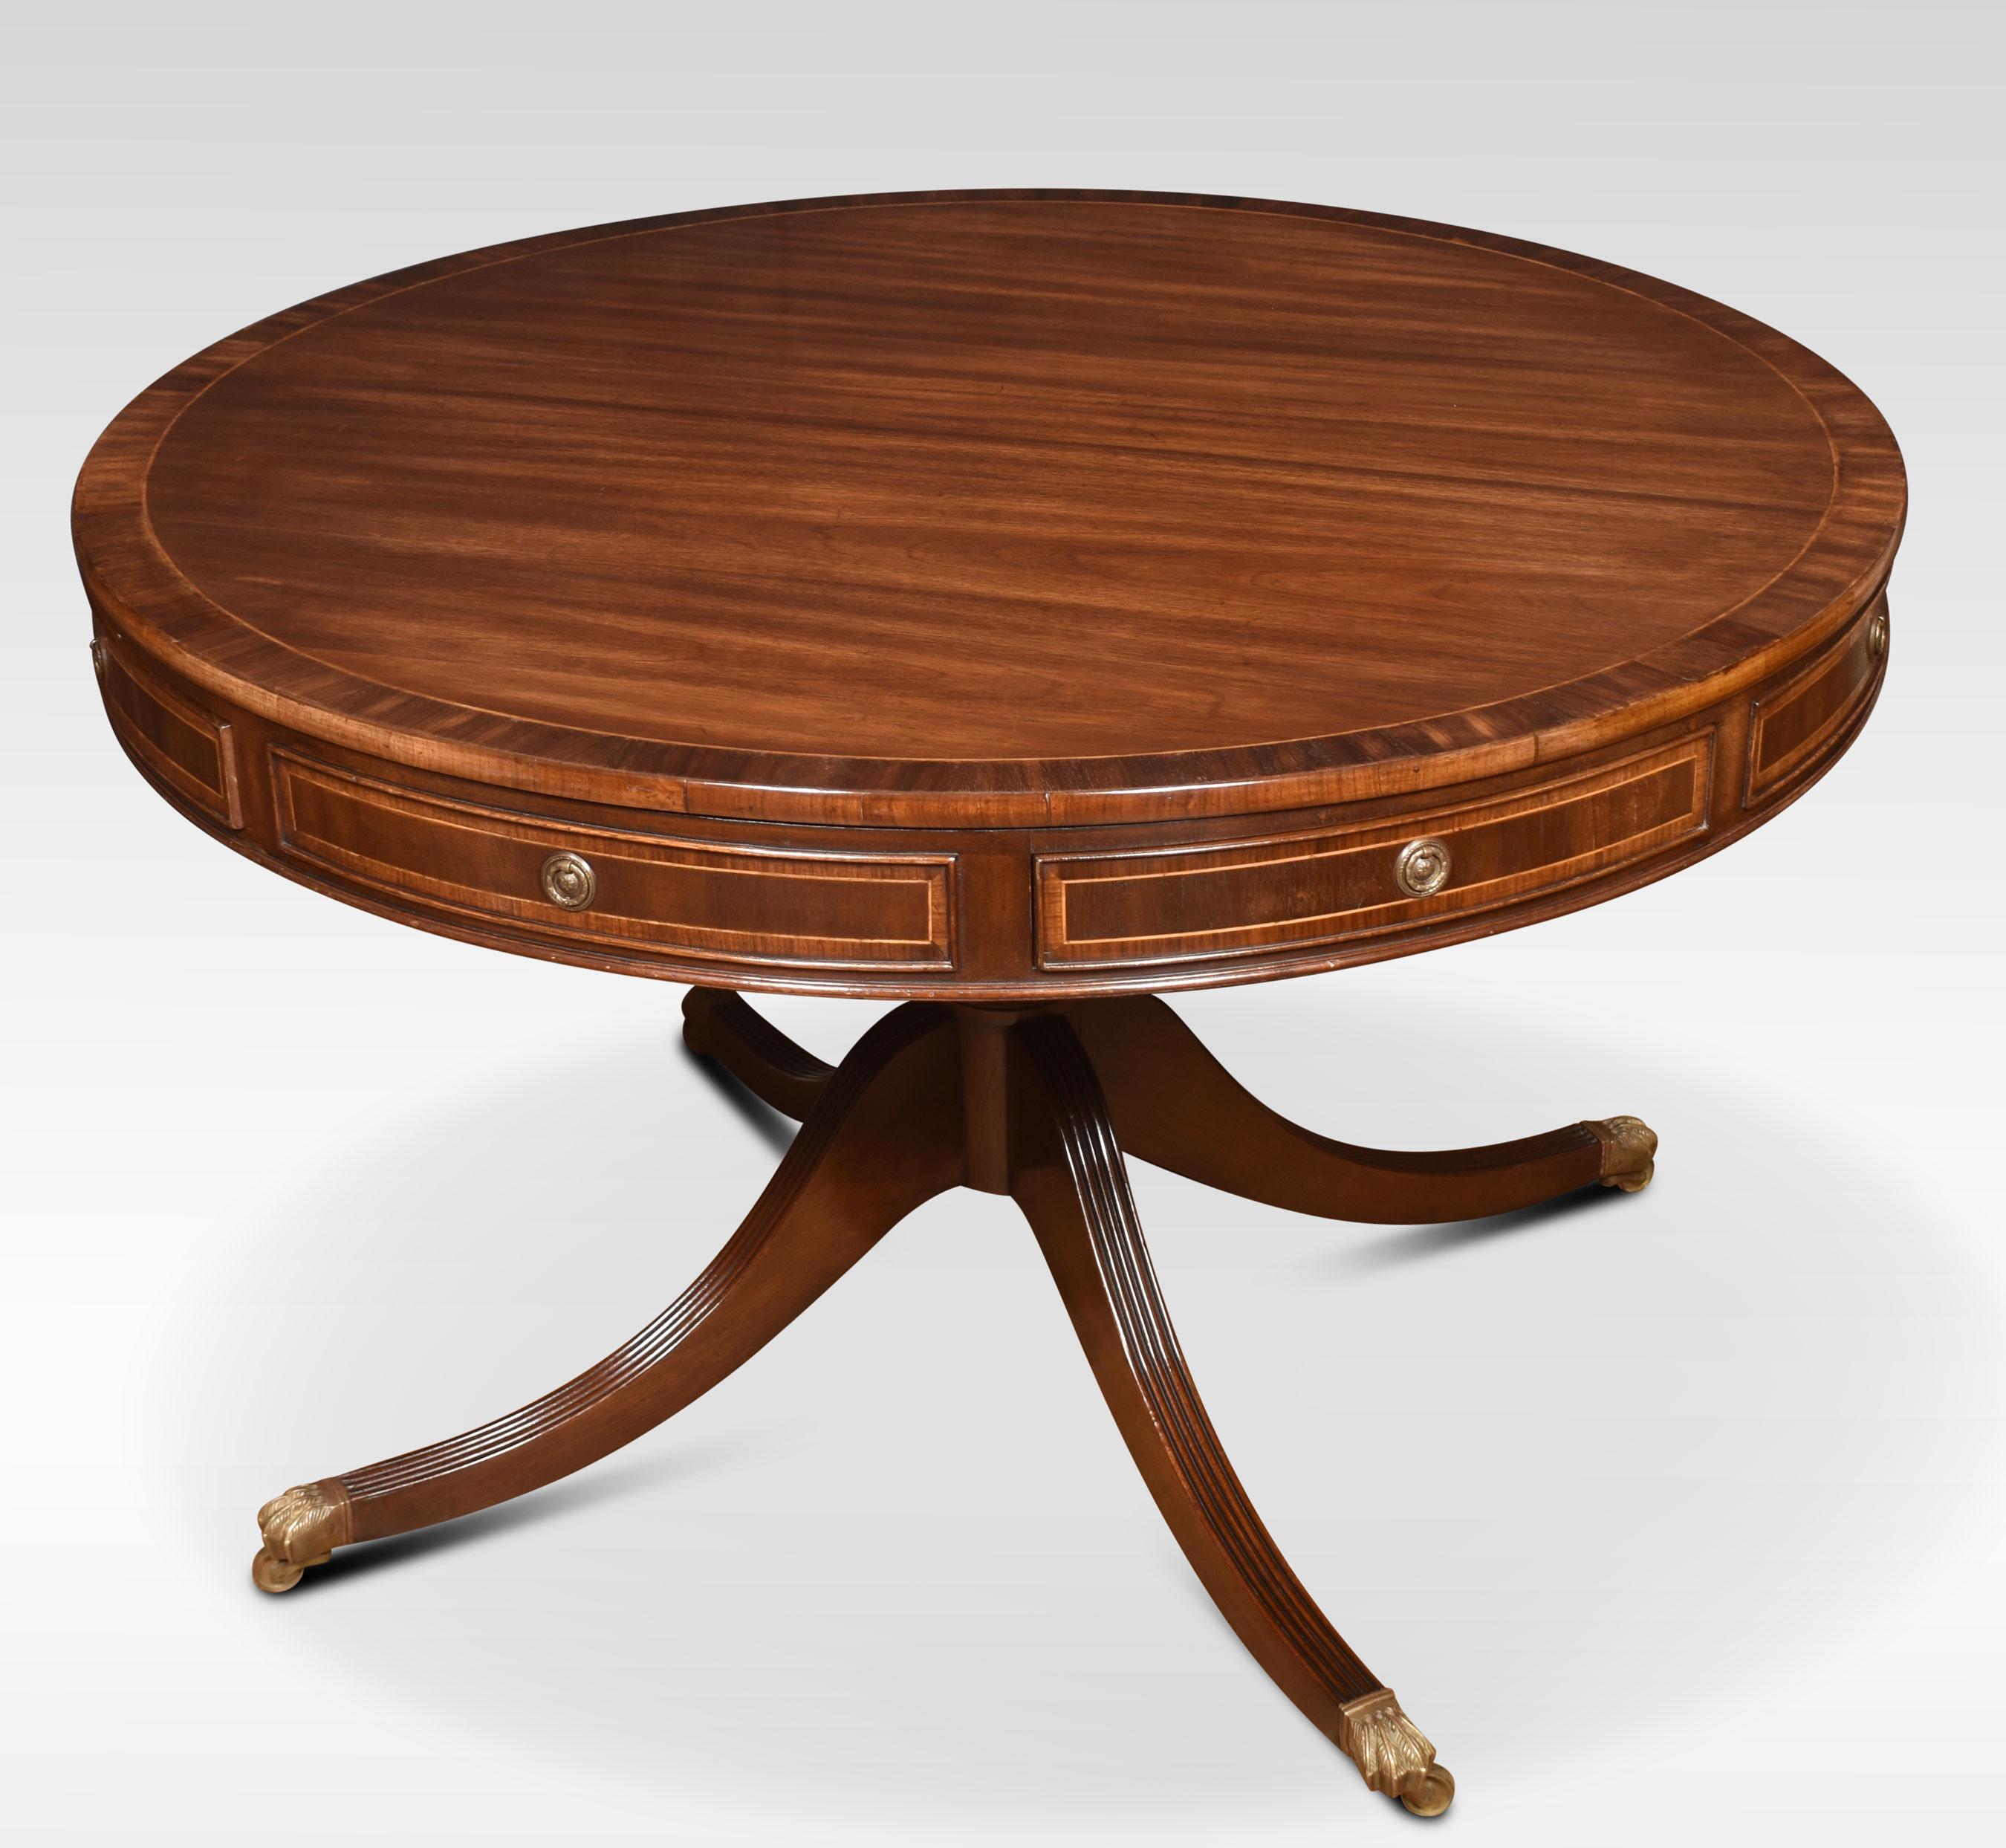 mahogany drum top library table, the well figured top with cross banded edge, above four frieze drawers and four false drawers, Raised up on splayed legs with brass caps and casters.
Dimensions
Height 31 inches
Width 48 inches
Depth 48 inches.